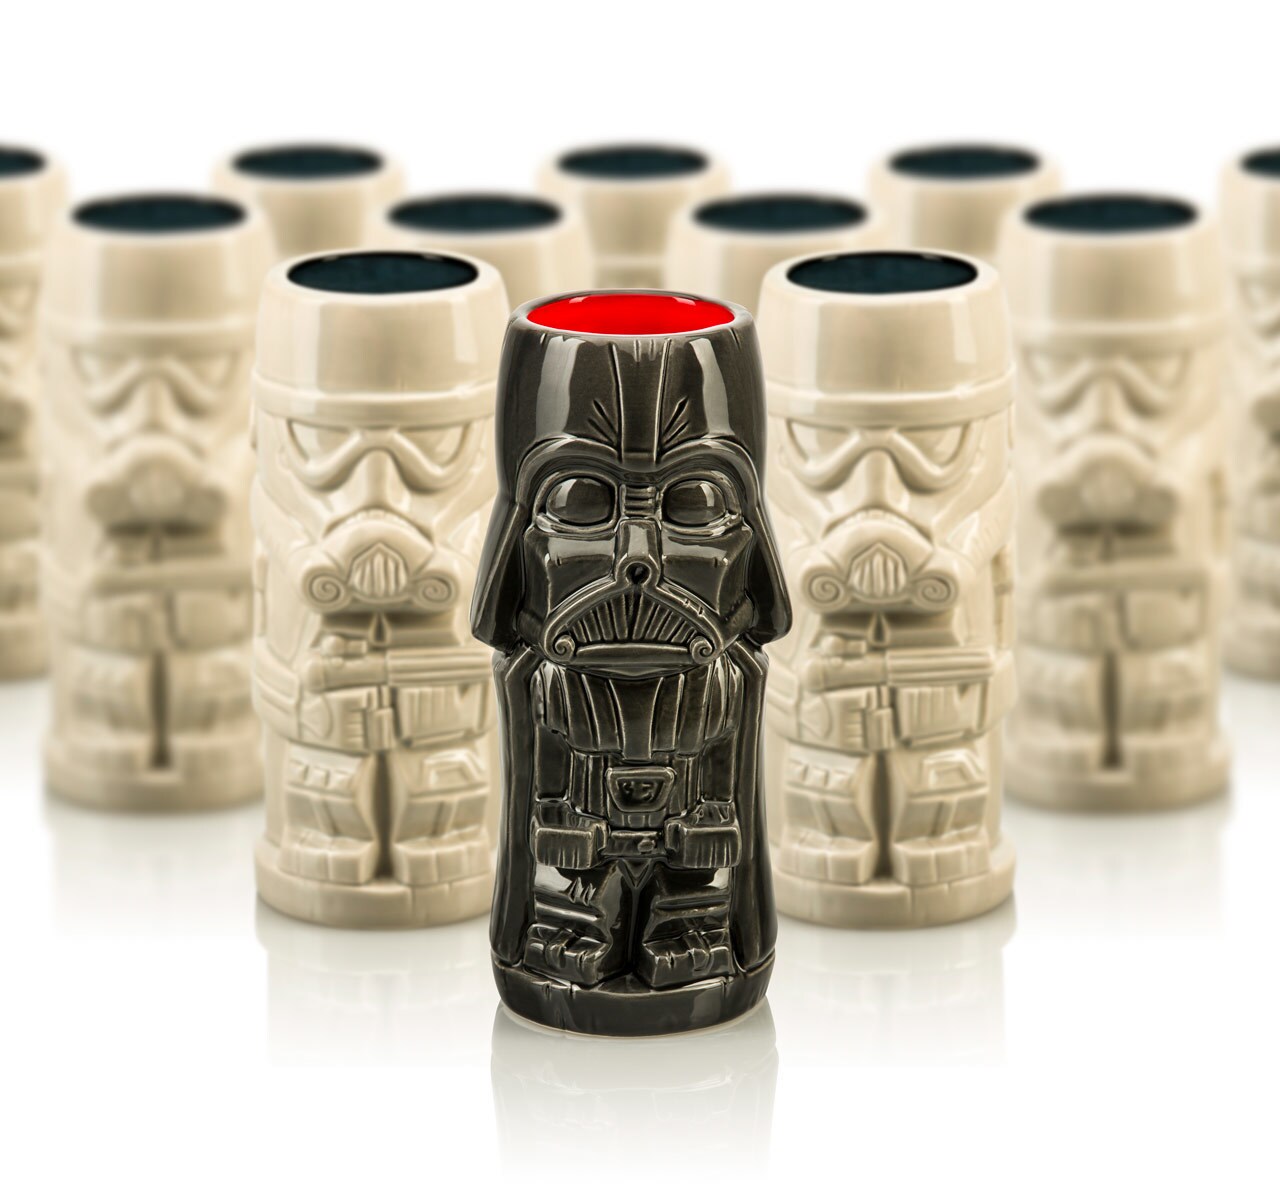 A Darth Vader themed tiki mug in front of a group of Stormtrooper themed tiki mugs.